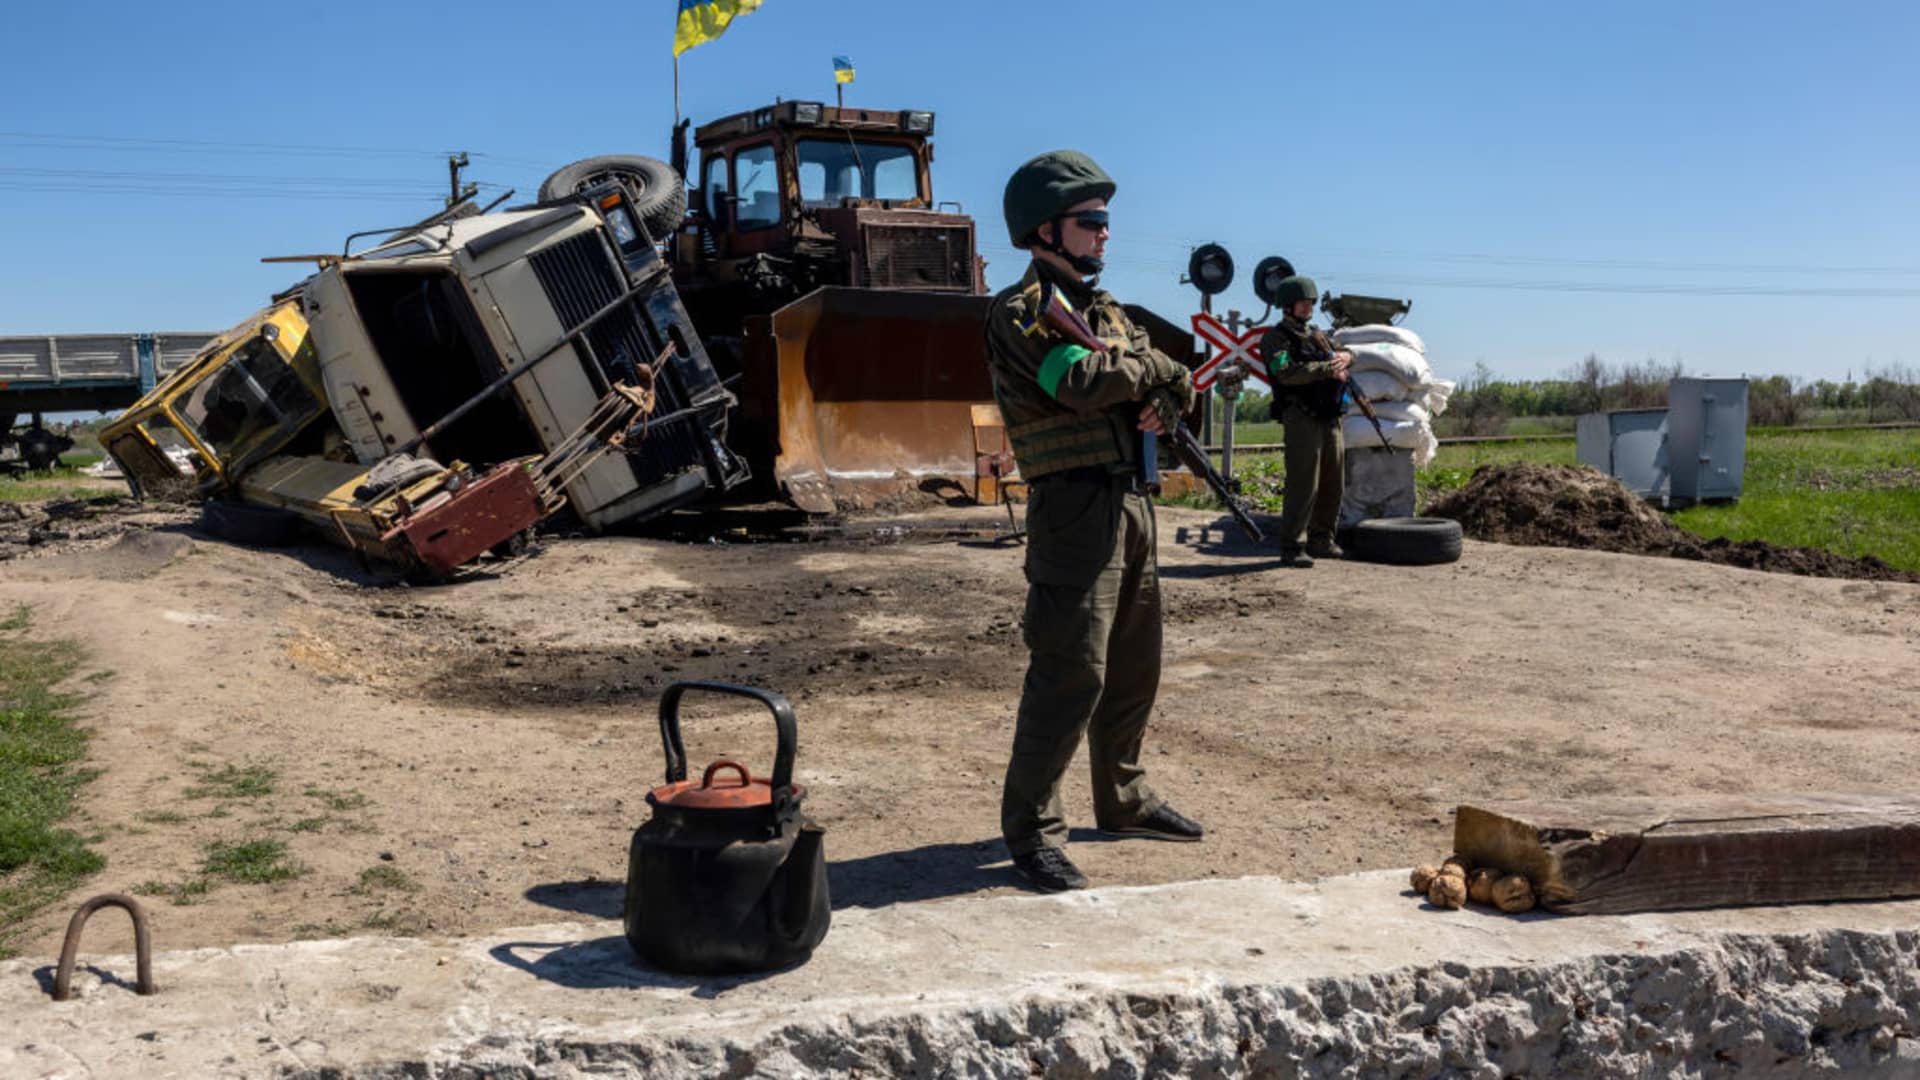 Ukrainian national guard soldiers stand watch near frontline positions on May 7, 2022 in Zelenodolsk, Ukraine. More than 500 members of the National Guard of Ukraine have died since Russia's invasion, Oleksiy Nadtochyi, the head of its operational department, said, NBC News reported.